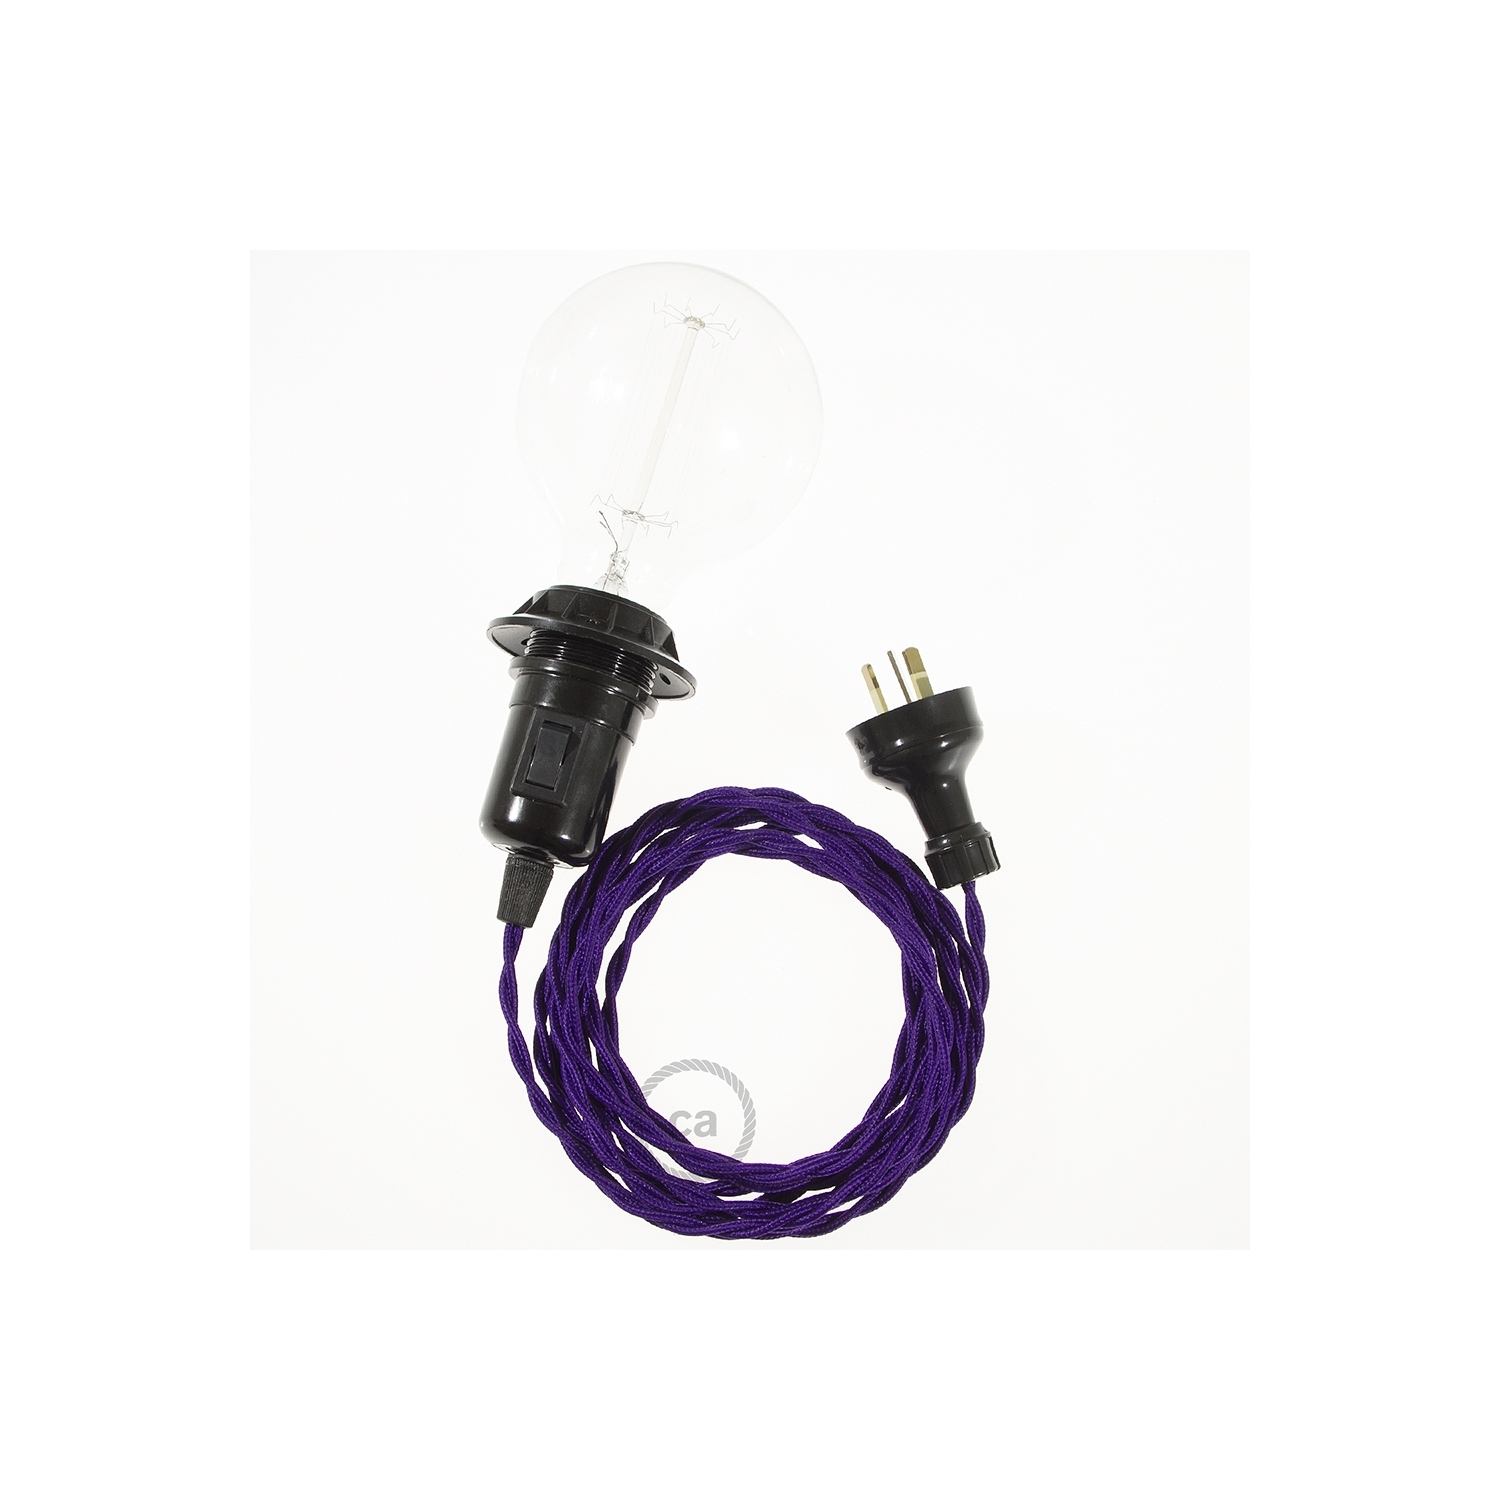 Create your TM14 Violet Rayon Snake for lampshade and bring the light wherever you want.